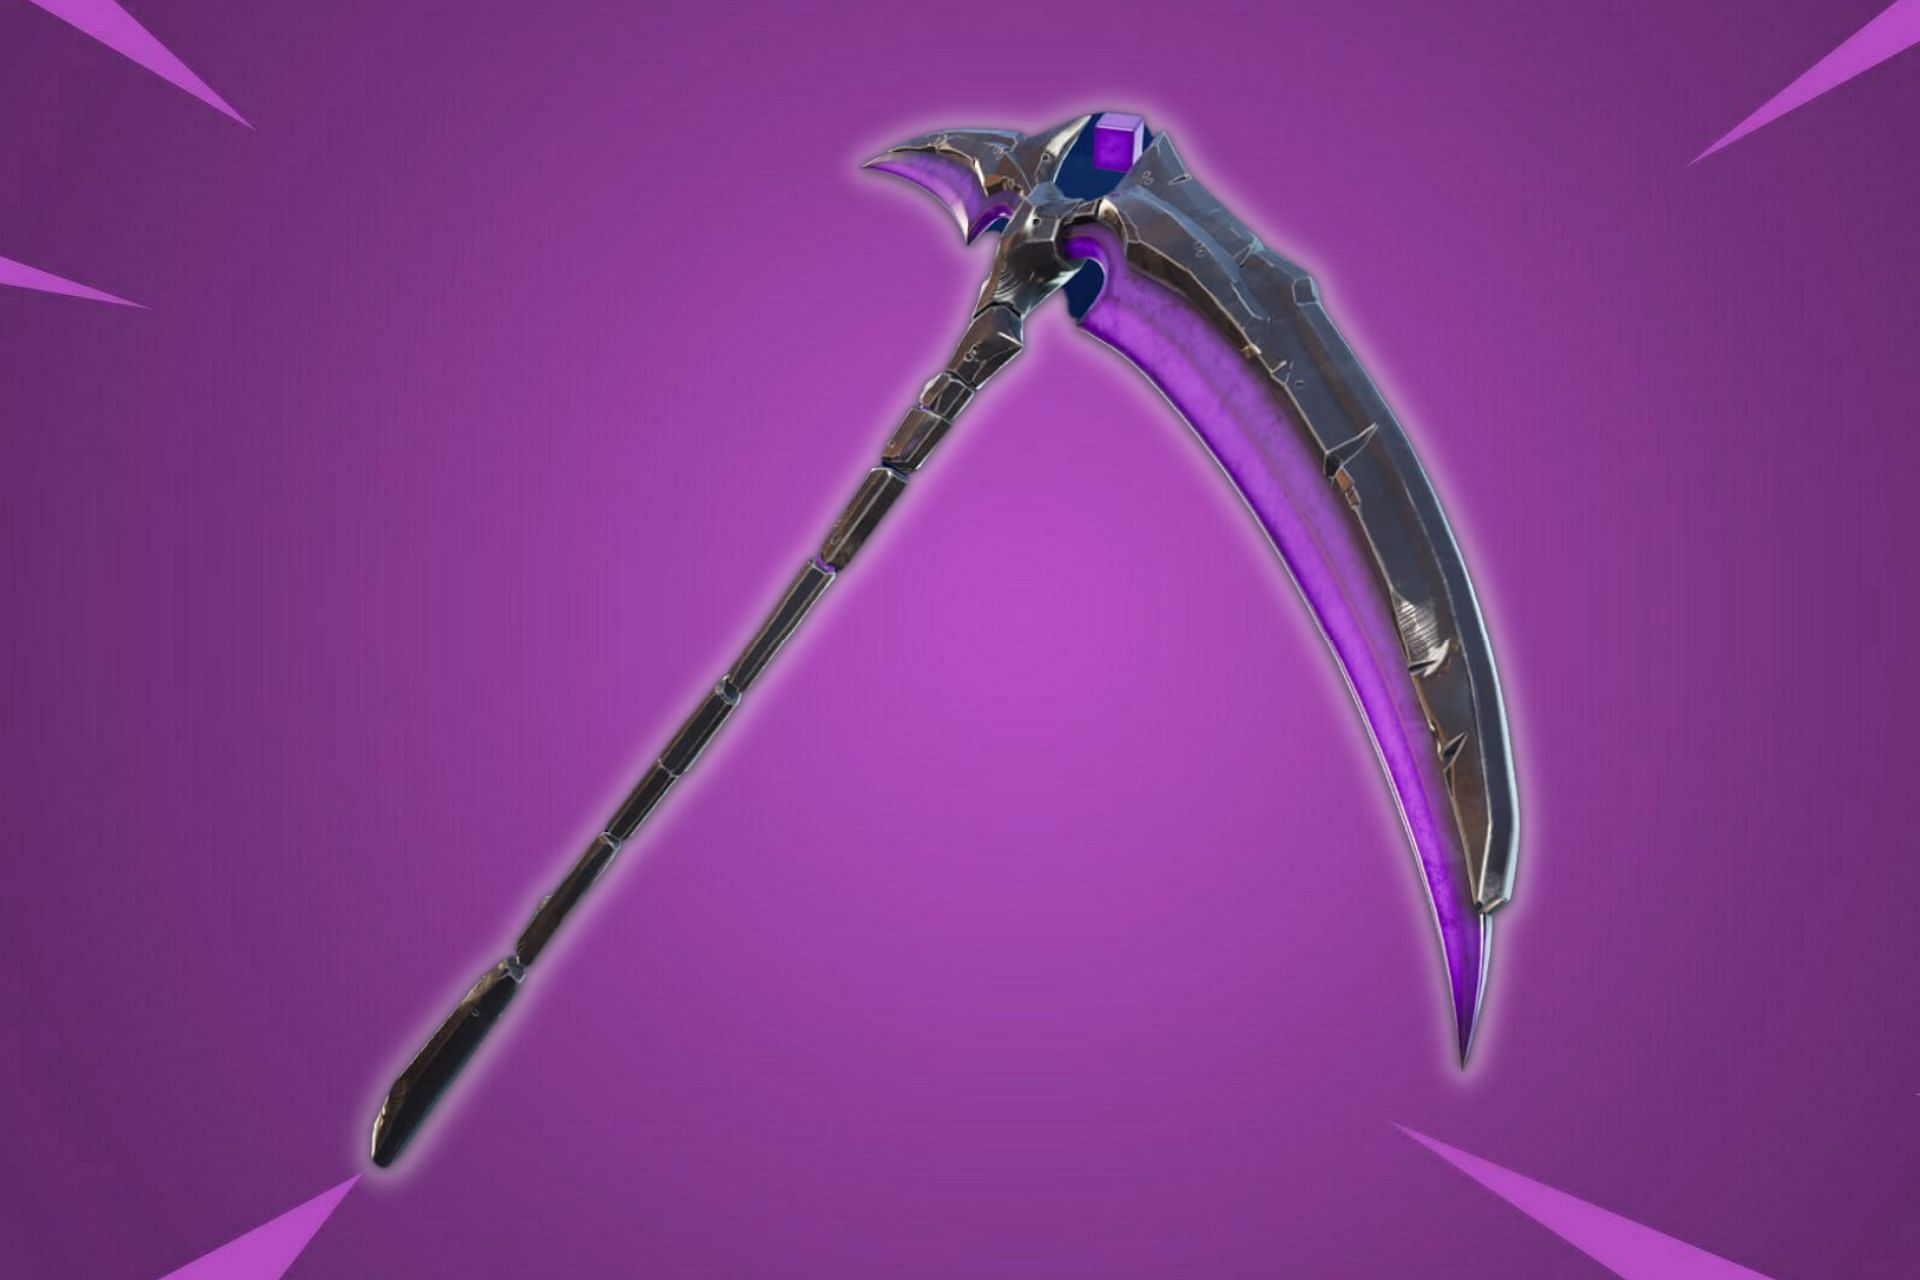 Players now have a new melee option in Fortnite Season 8 with the Sideways Scythe that was added to the game in the v18.21 update (Image via Sportskeeda)